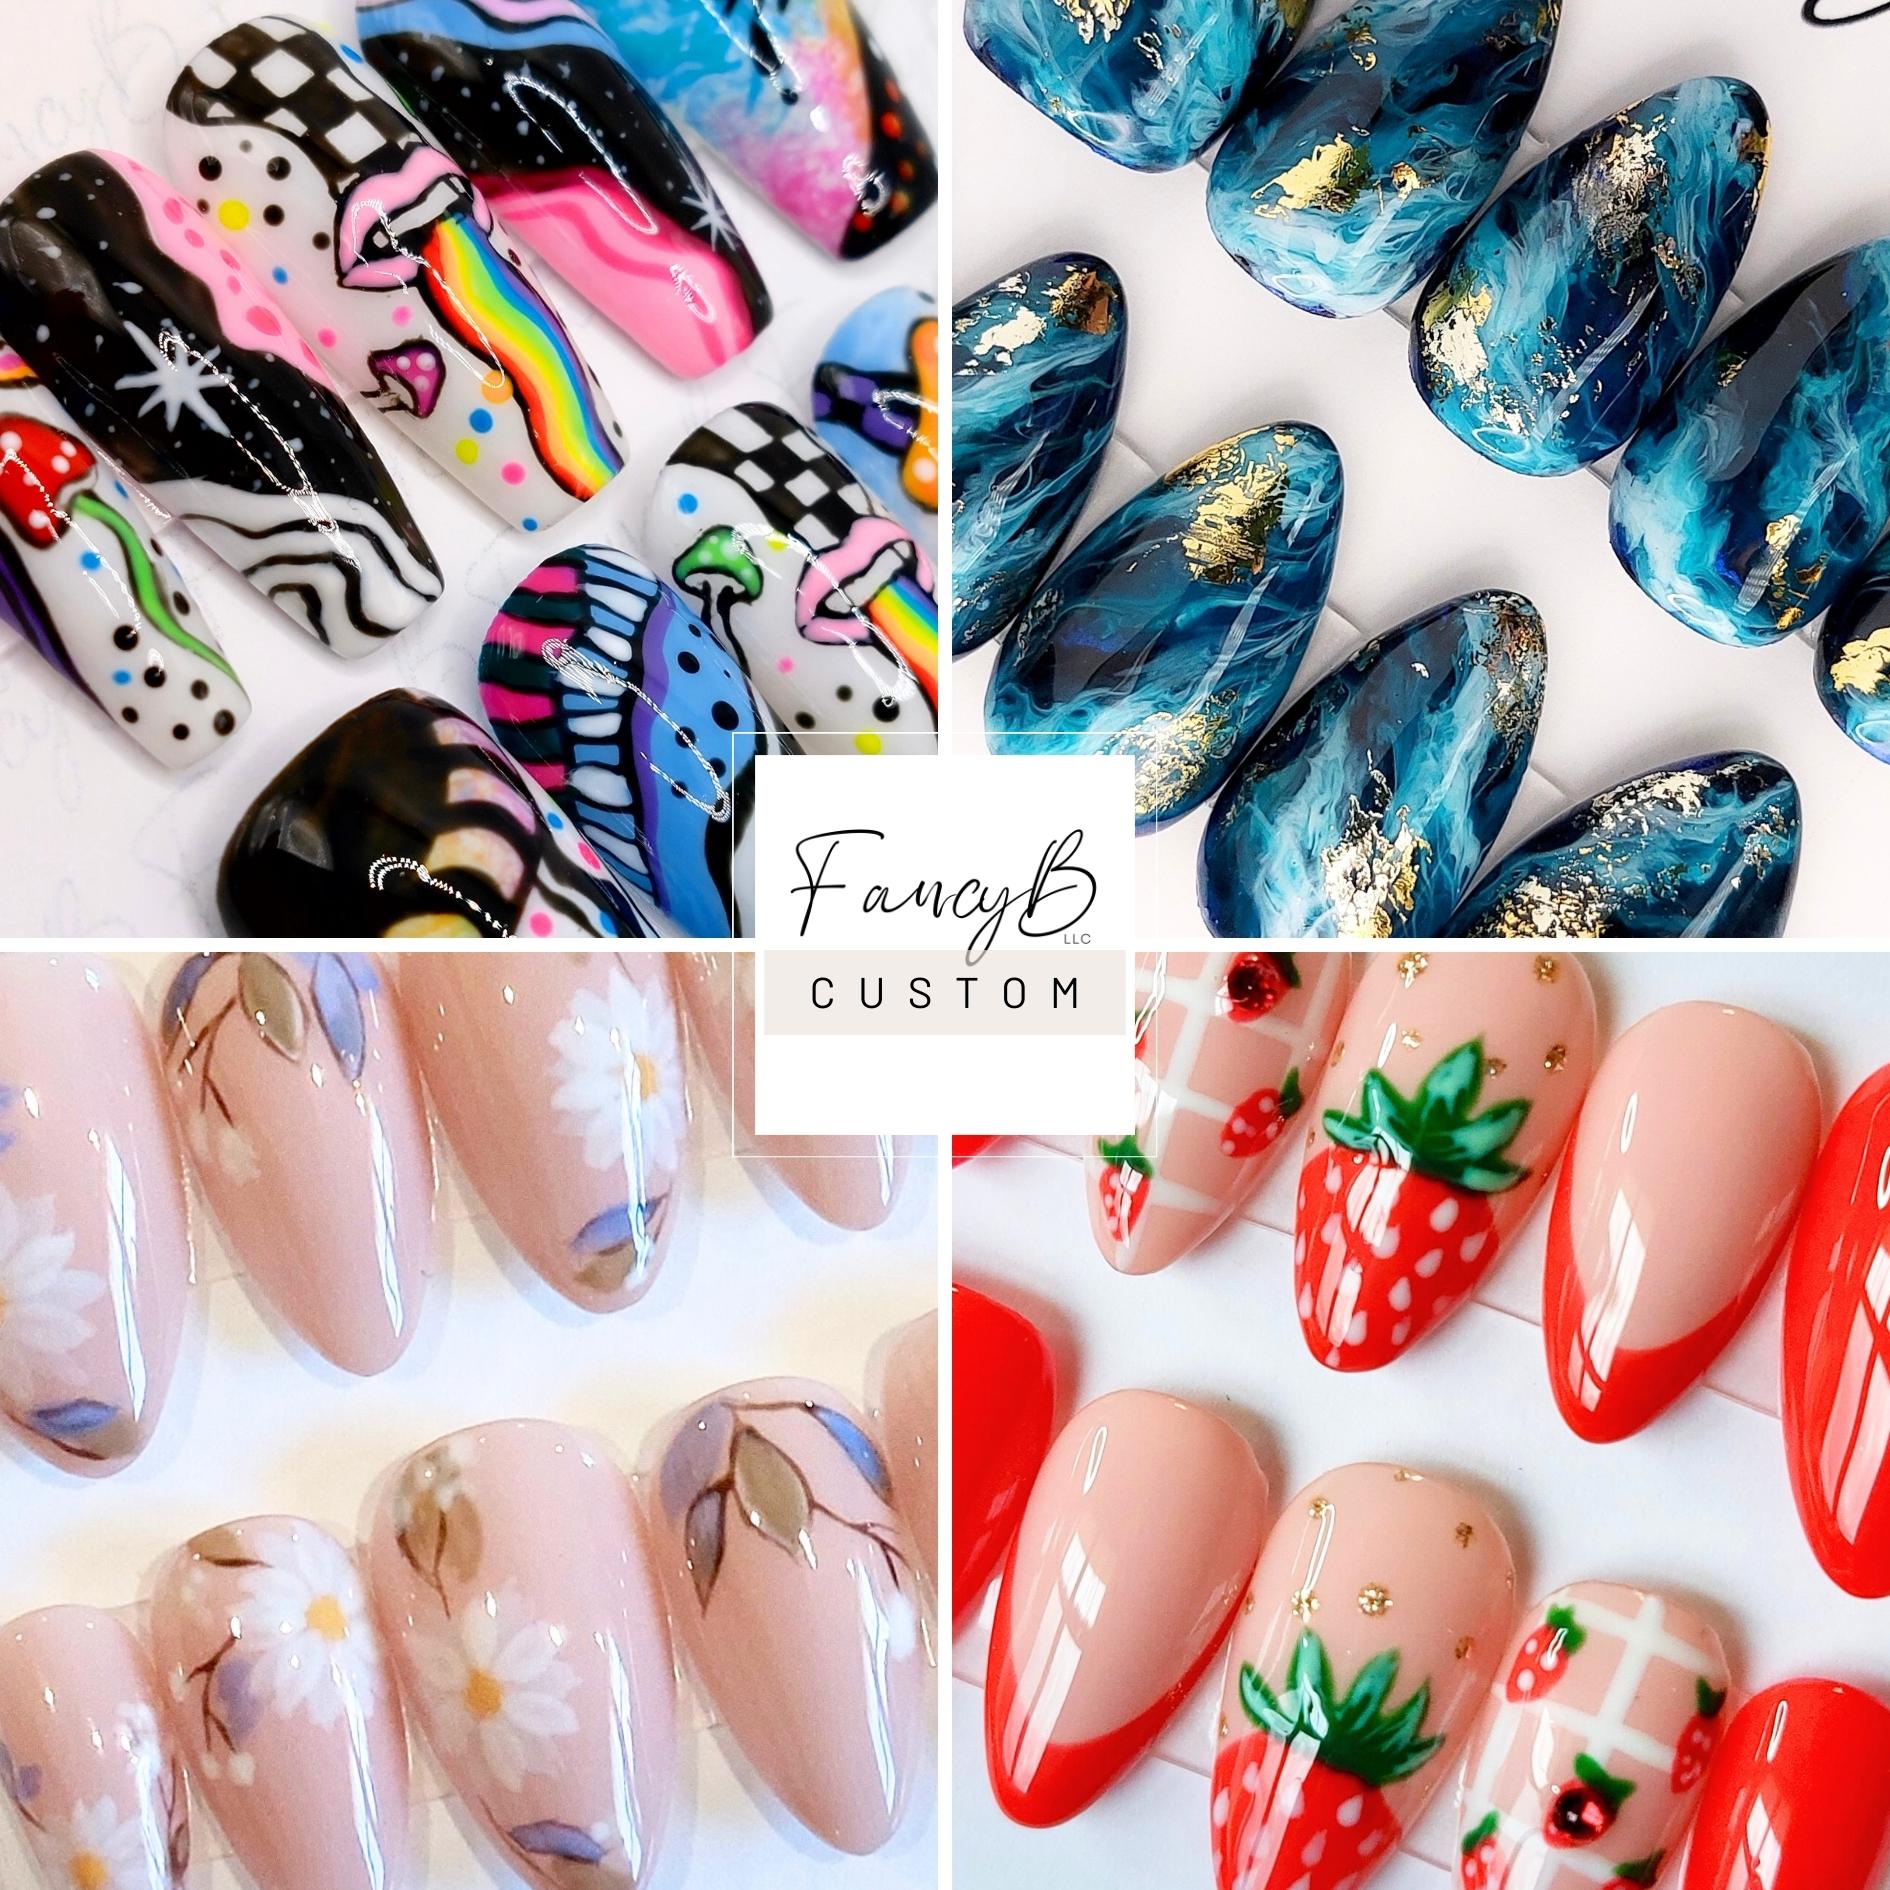 Custom psychedelic maximalist nails with colorful art, ocean beachy blue marble nails in short almond, custom floral nails with hand painted florals in almond shape, custom strawberry nails with hand painted strawberries, mini strawberries, red french accents custom request from FancyB nails